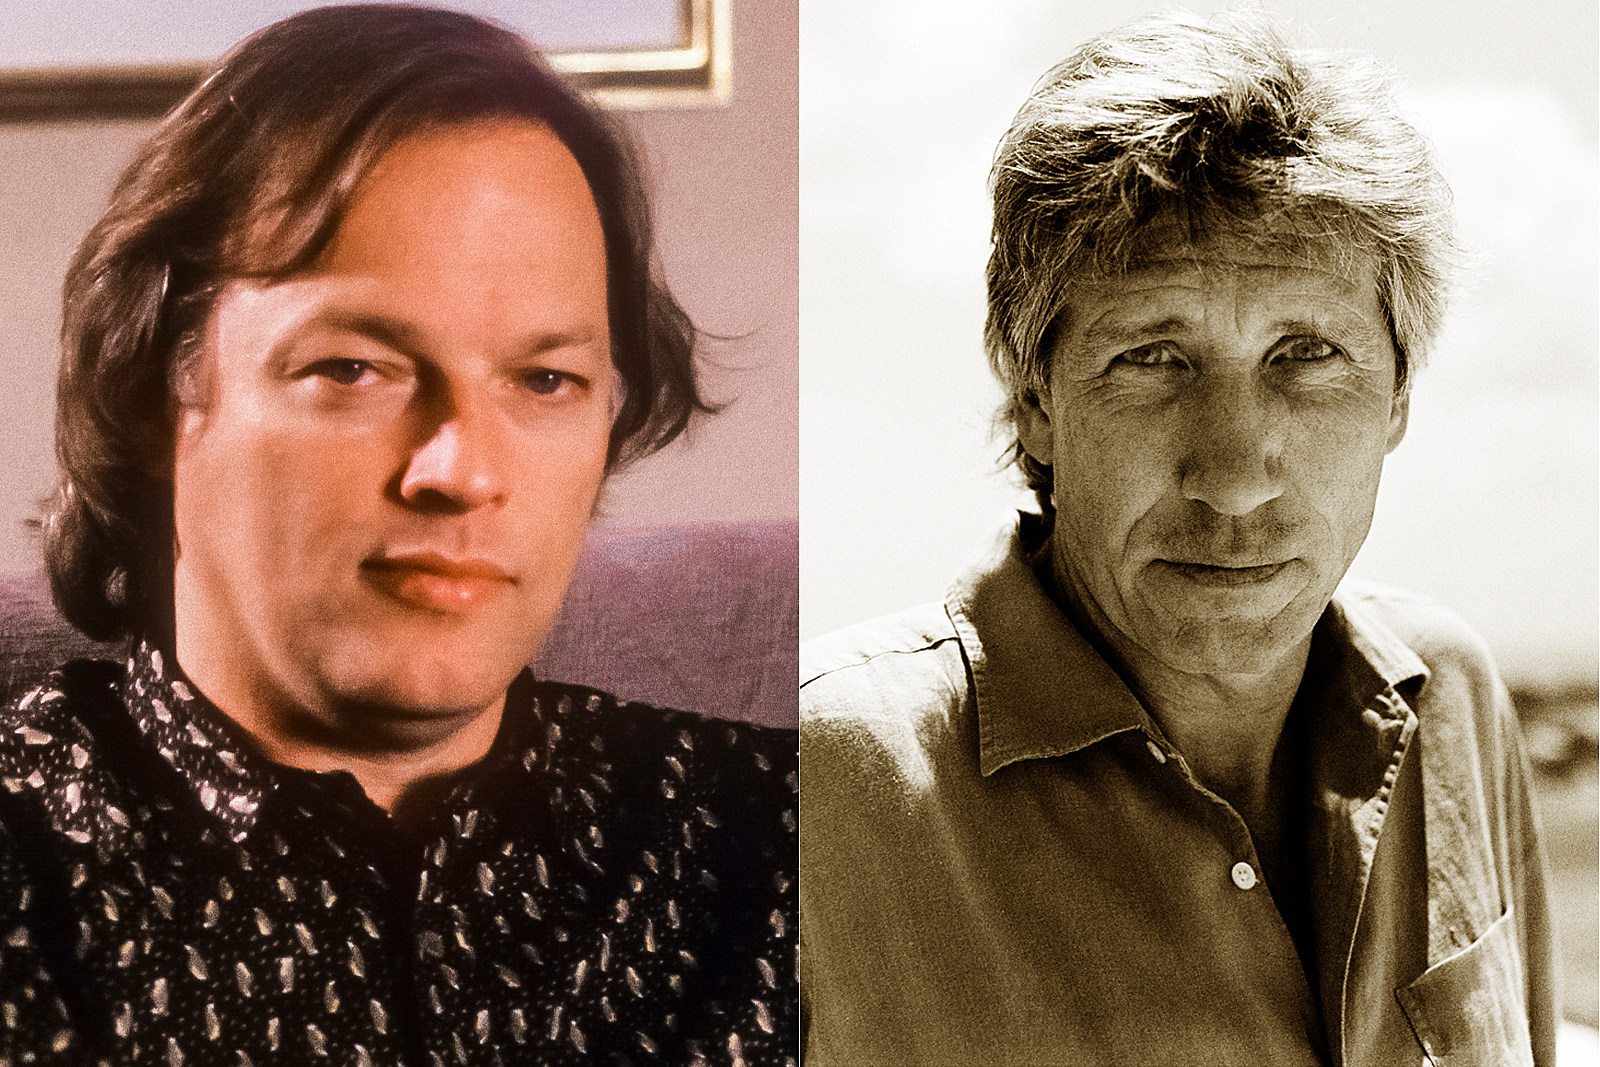 35 Years Ago: Pink Floyd Pledge to Carry on After Waters’ Exit